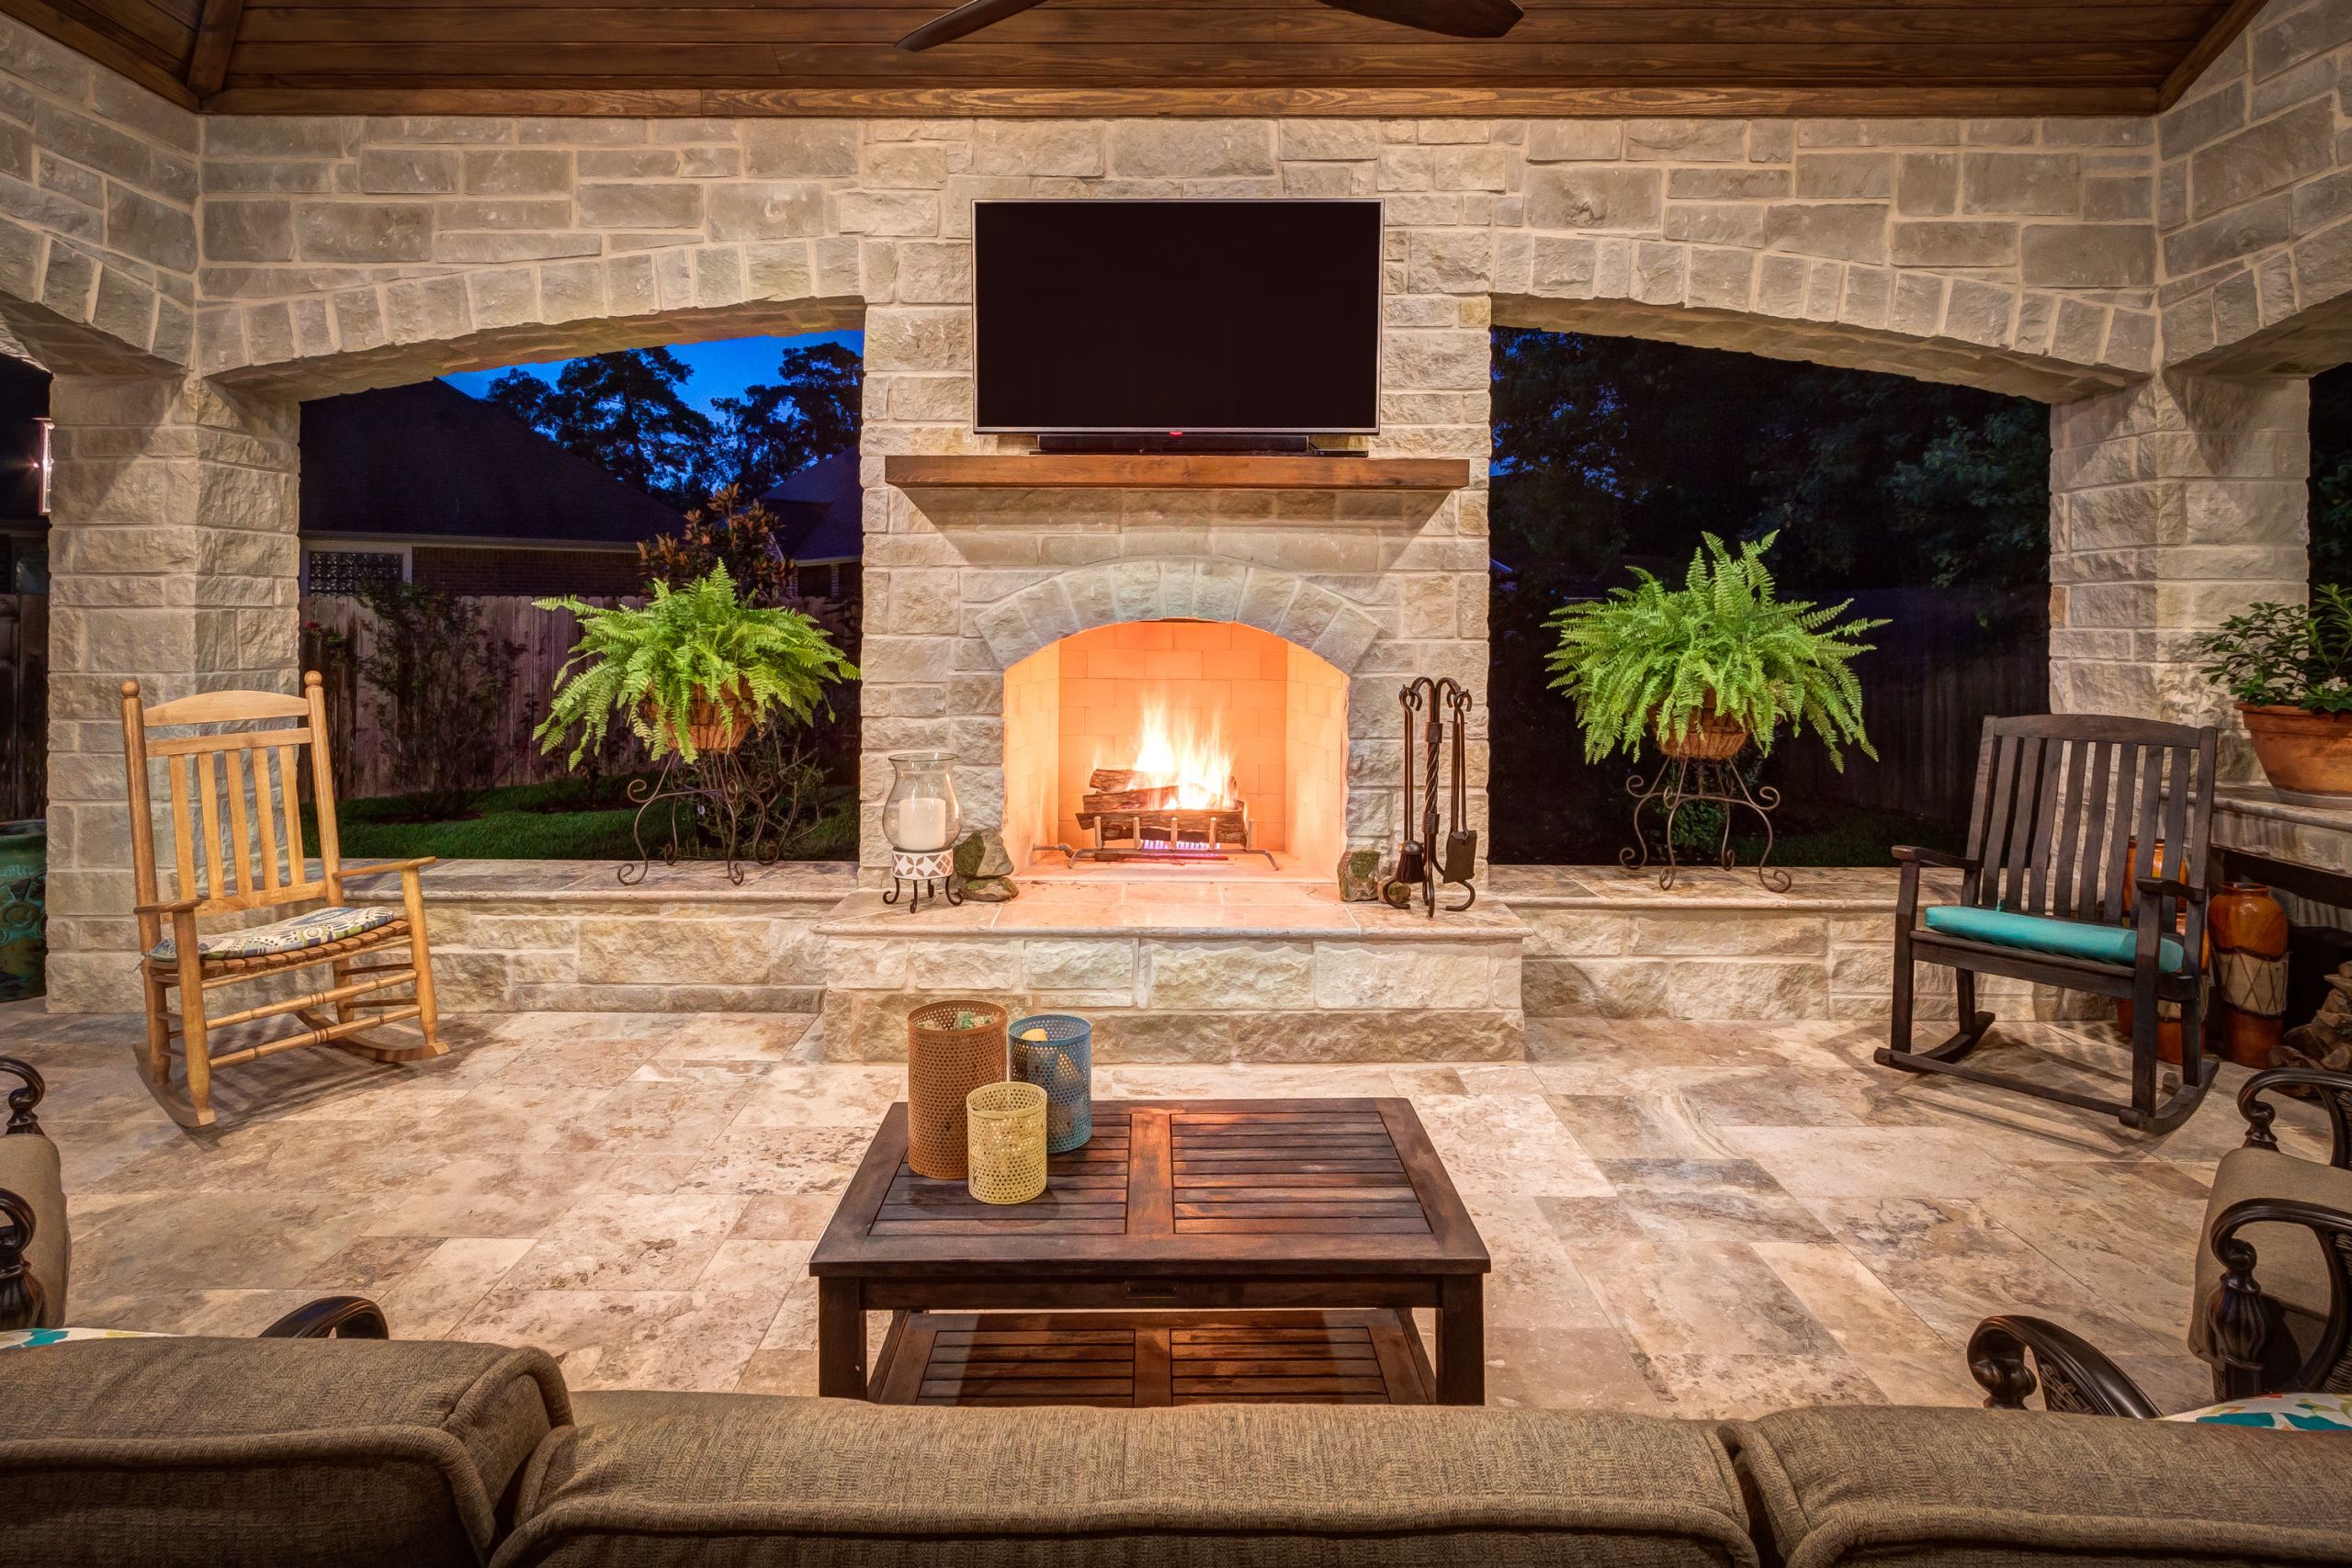 Outdoor Fireplace Or Fire Pit
 Outdoor Fire Pits and Fireplaces